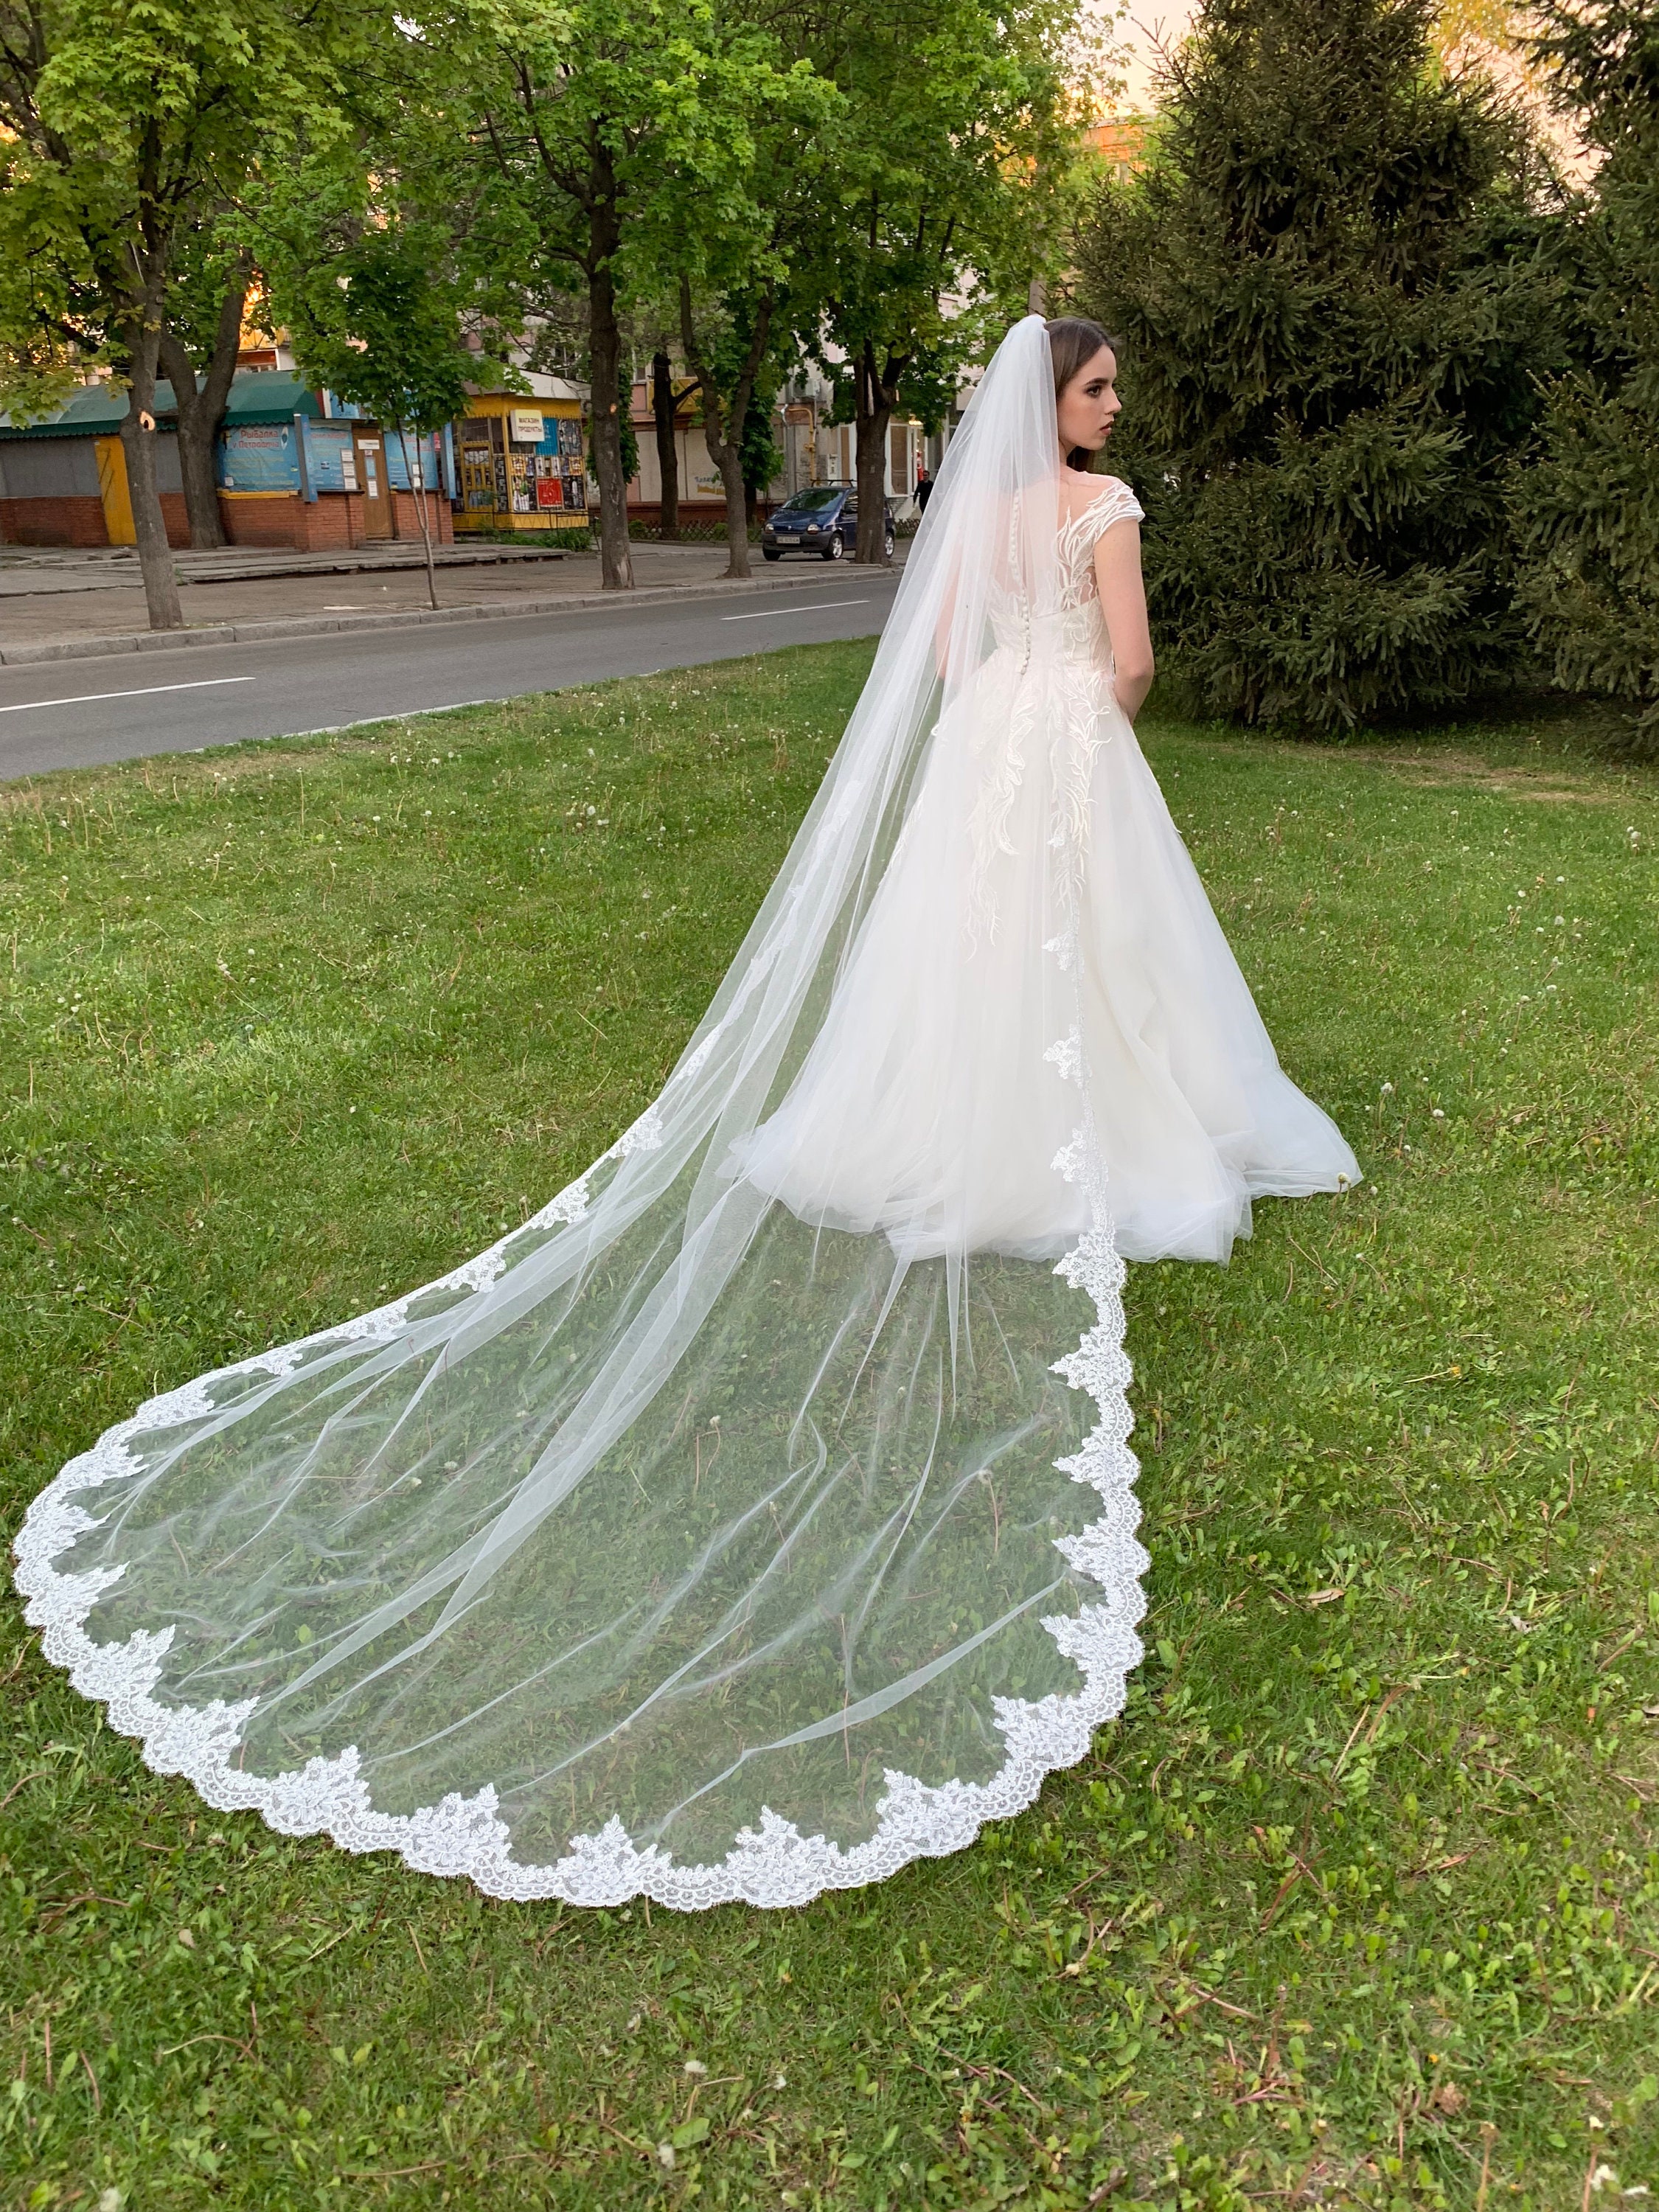 Bride Wedding Lace Veils Long Cathedral Veil Soft Tulle Bridal Veils with Comb 118 (White)